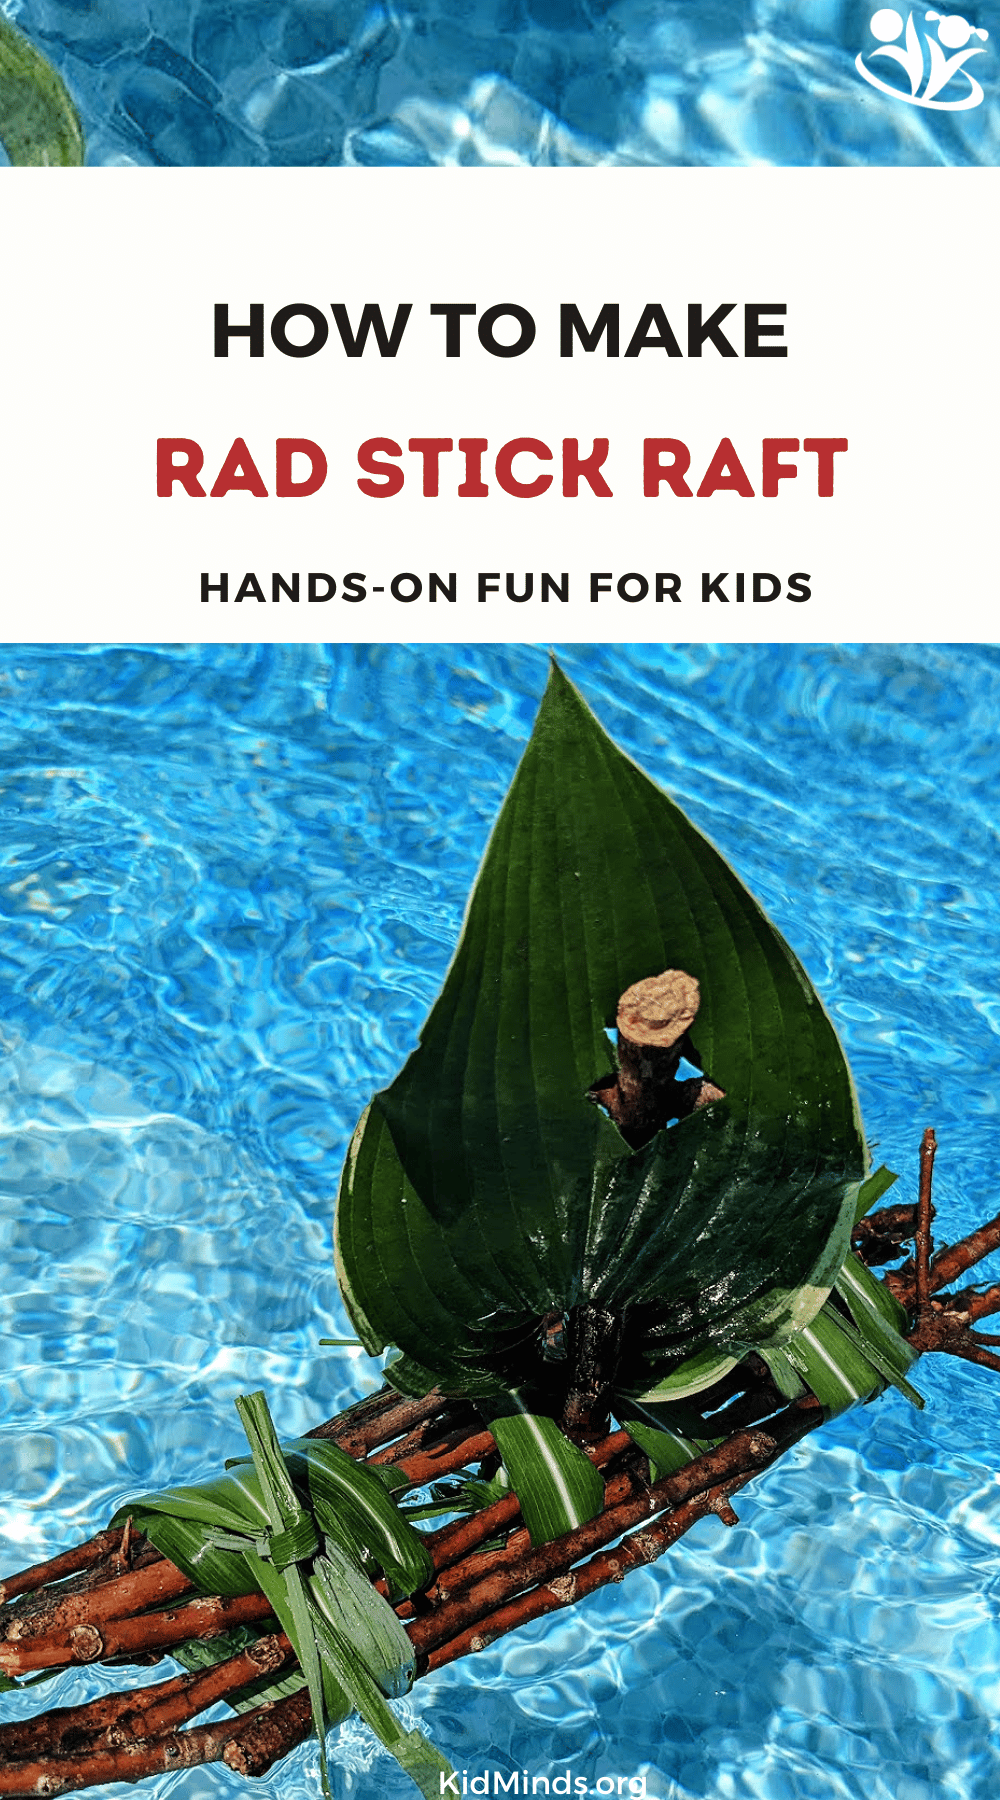 All you need to make a raft are a few natural items you can find in your own backyard or local park. You'd never guess this is a great introduction to physics and can keep your kids occupied for hours. #kidsactivities #learningthroughplay #homeschooling #parenting #play #activitiesforkids #kidminds #sensoryplay #education #children #fun #playandlearn #creativekids